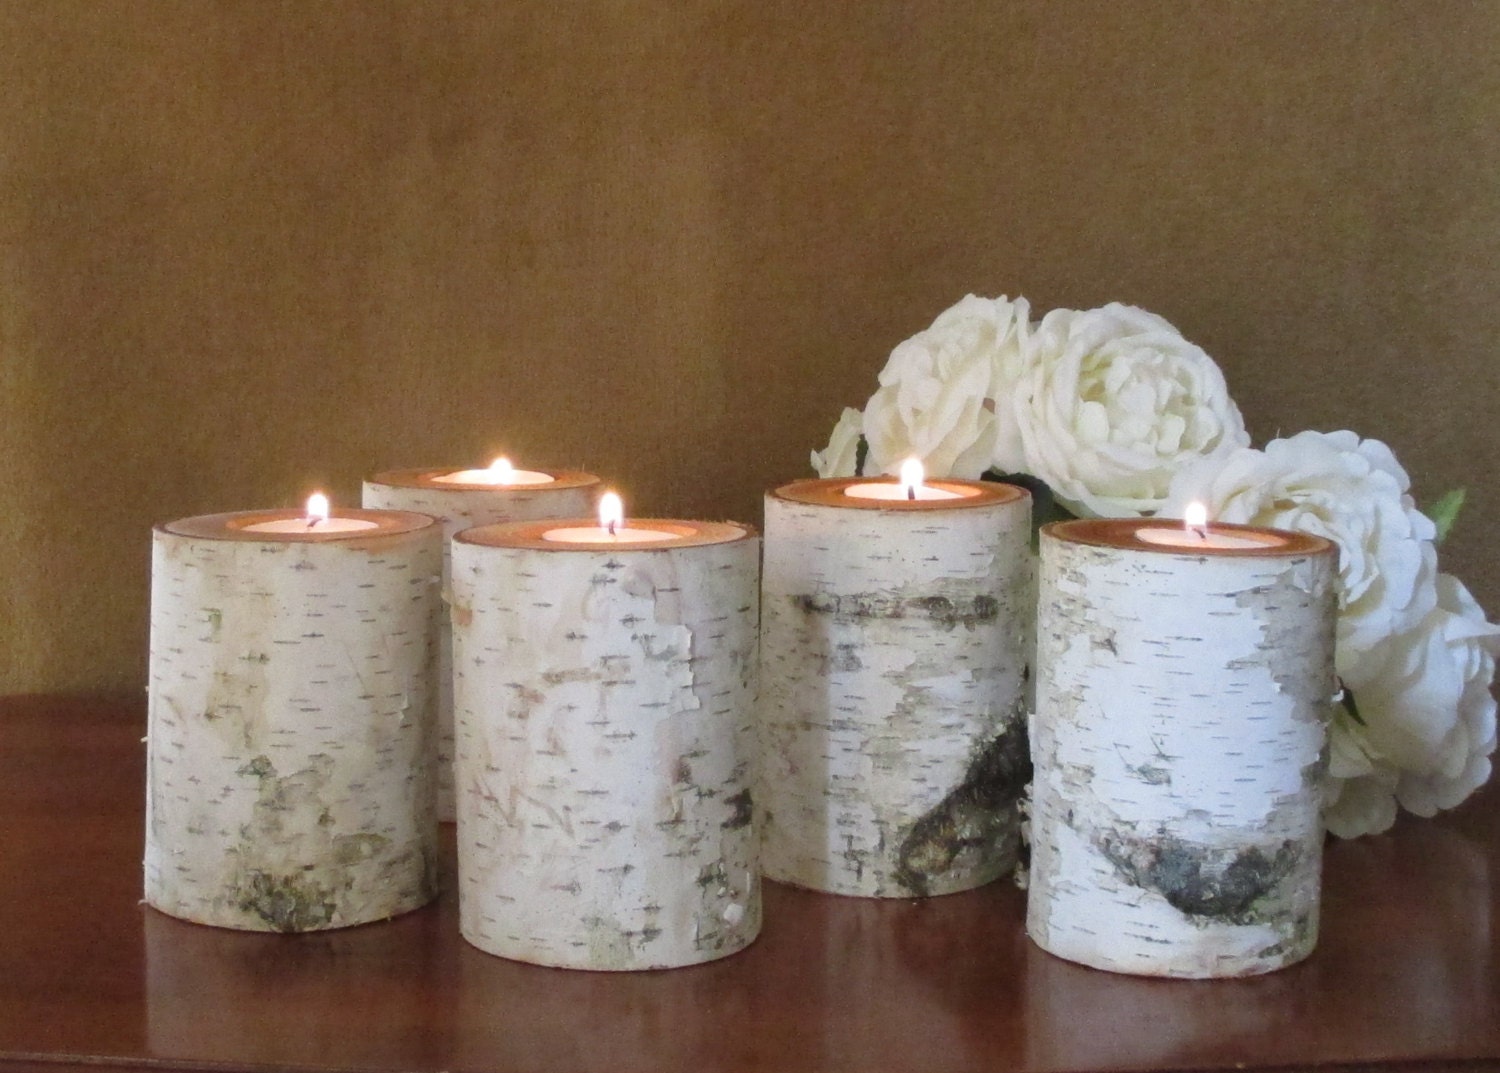 10 4" Birch Candle Holders for Weddings, Bridal Showers, Garden Party Centerpieces Reception Holiday Decor